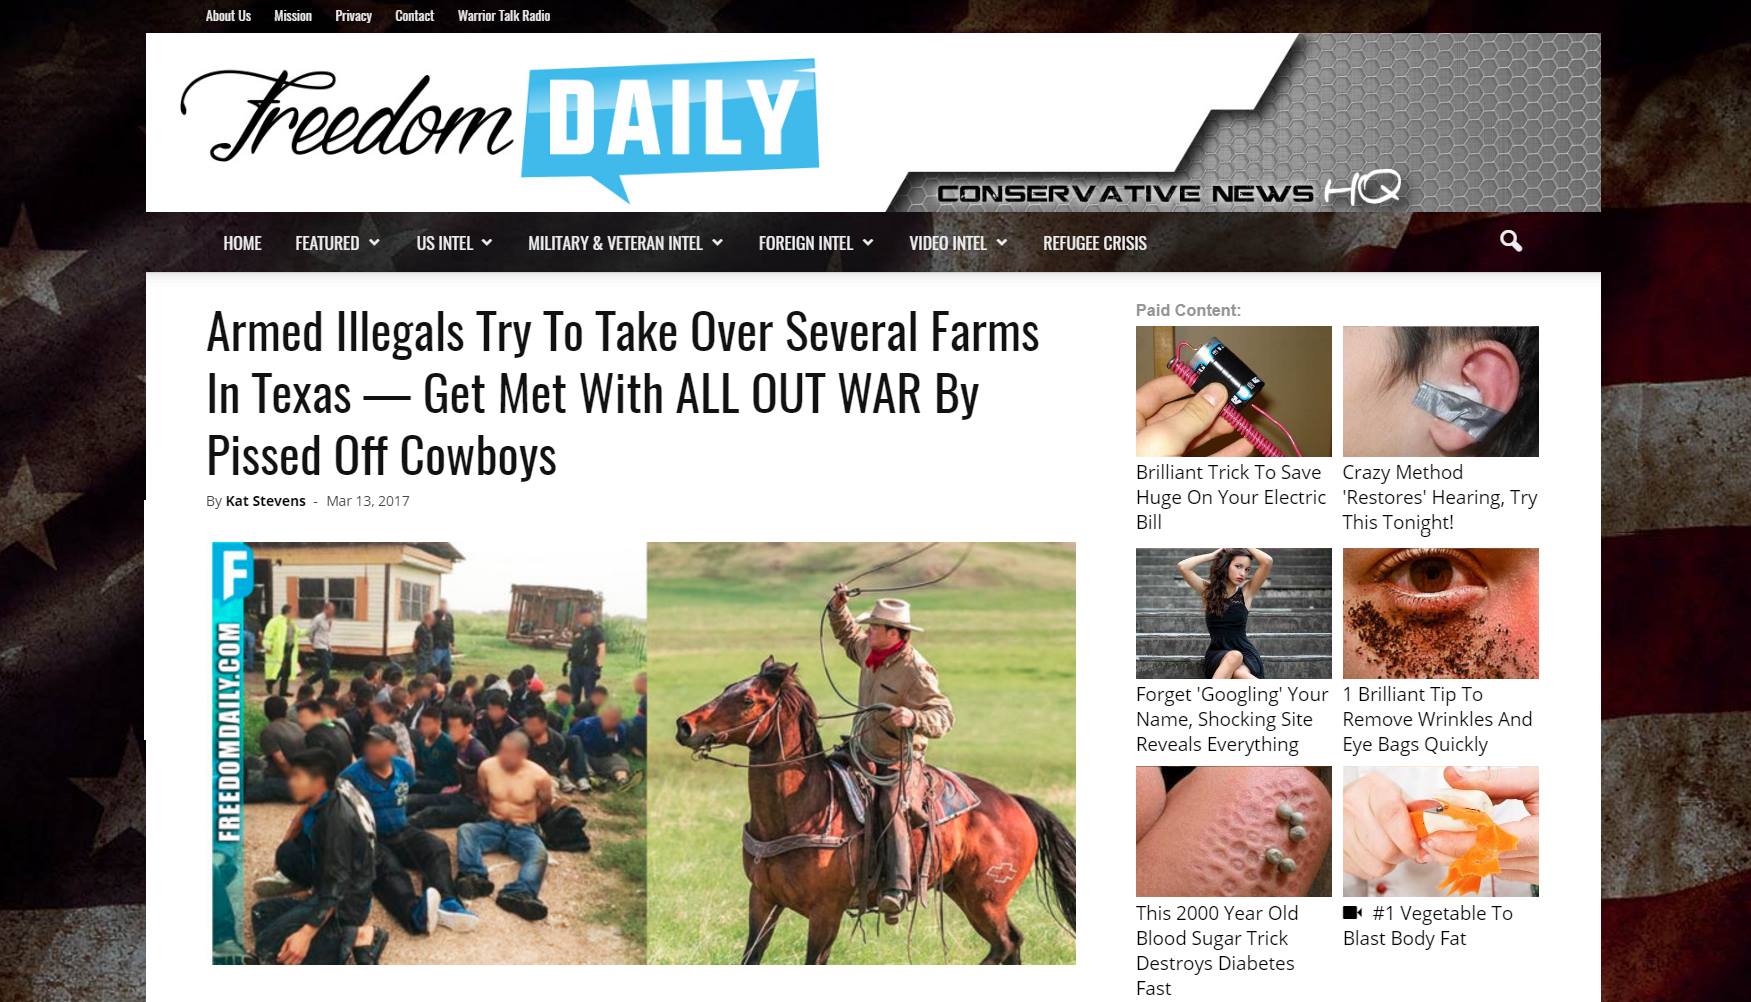 Photos of cowboys stolen by website to promote fake news